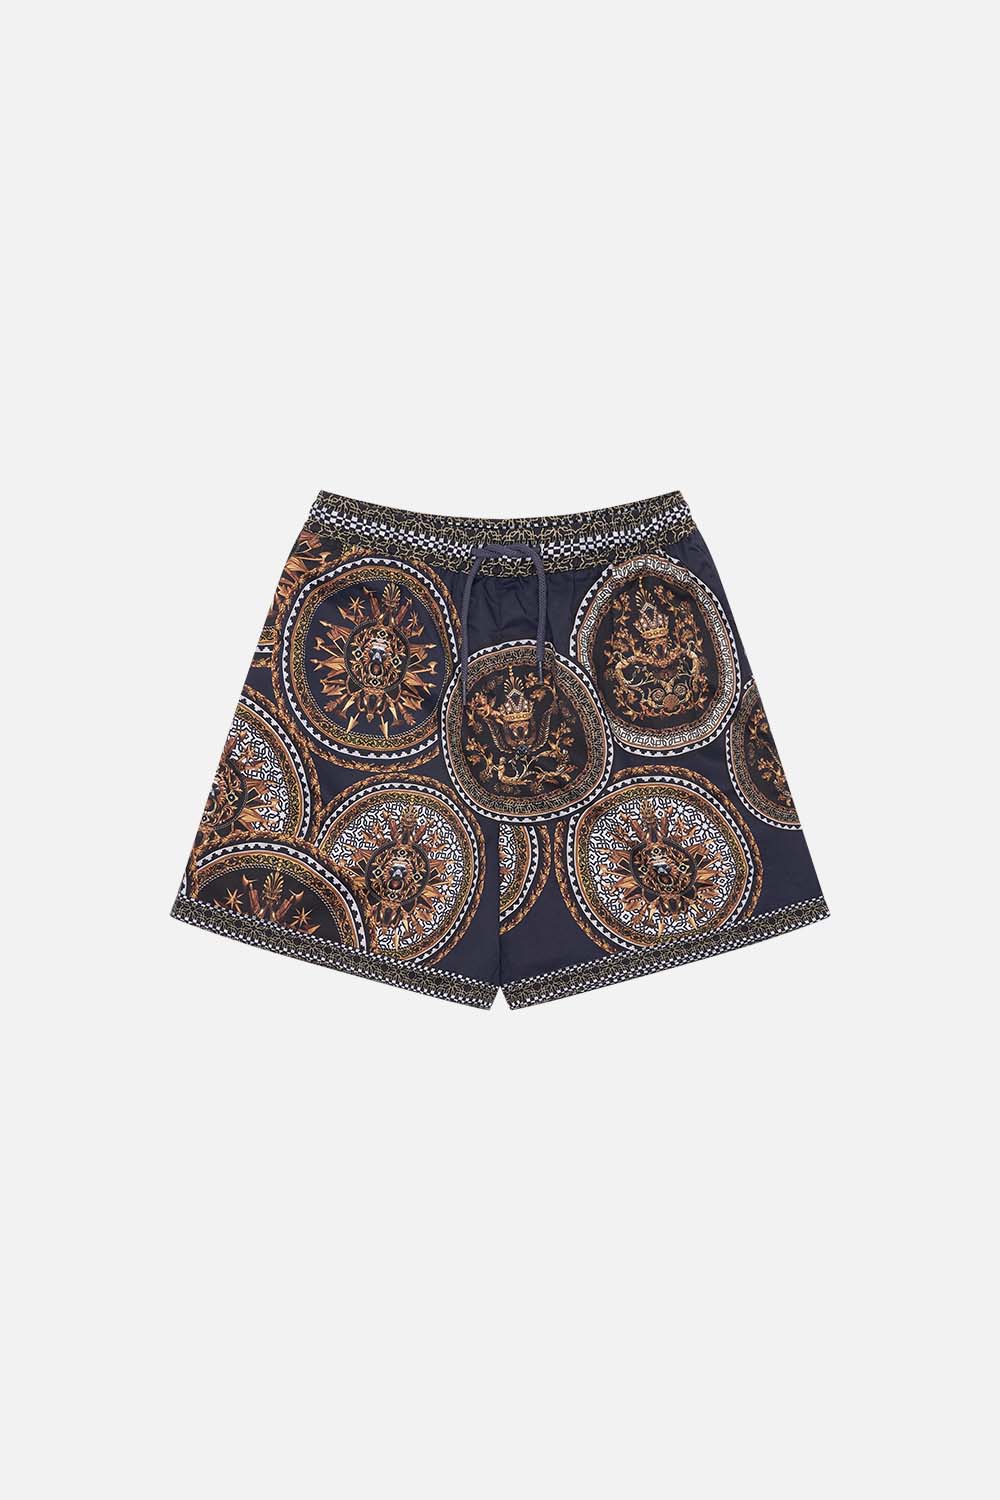 Product view of MILLA BY CAMILLA boys short in Duomo Kaleido print 